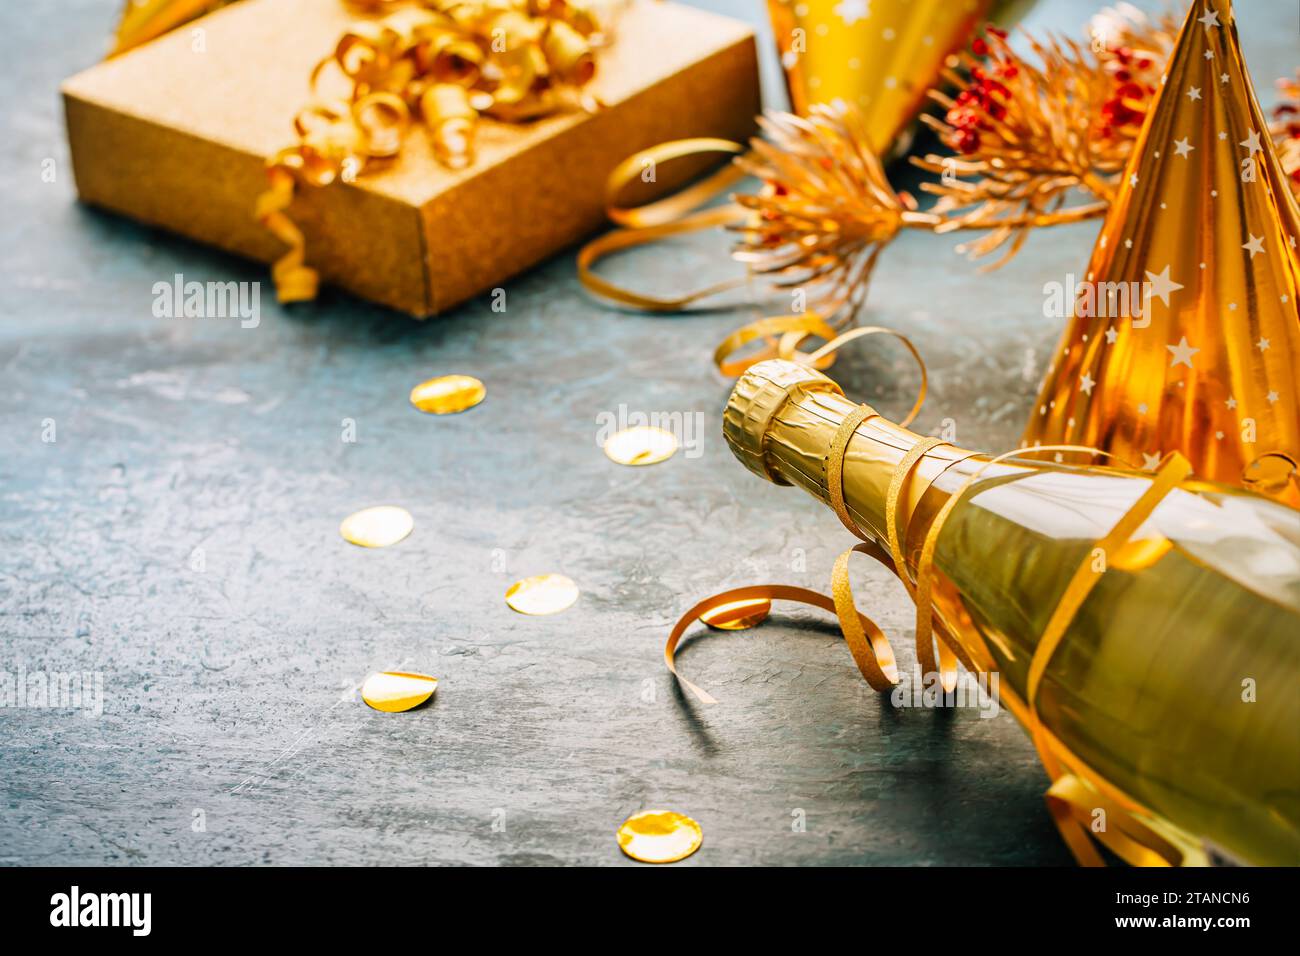 Happy New Year celebration,  bottle of champagne, bright lights and gifts Stock Photo